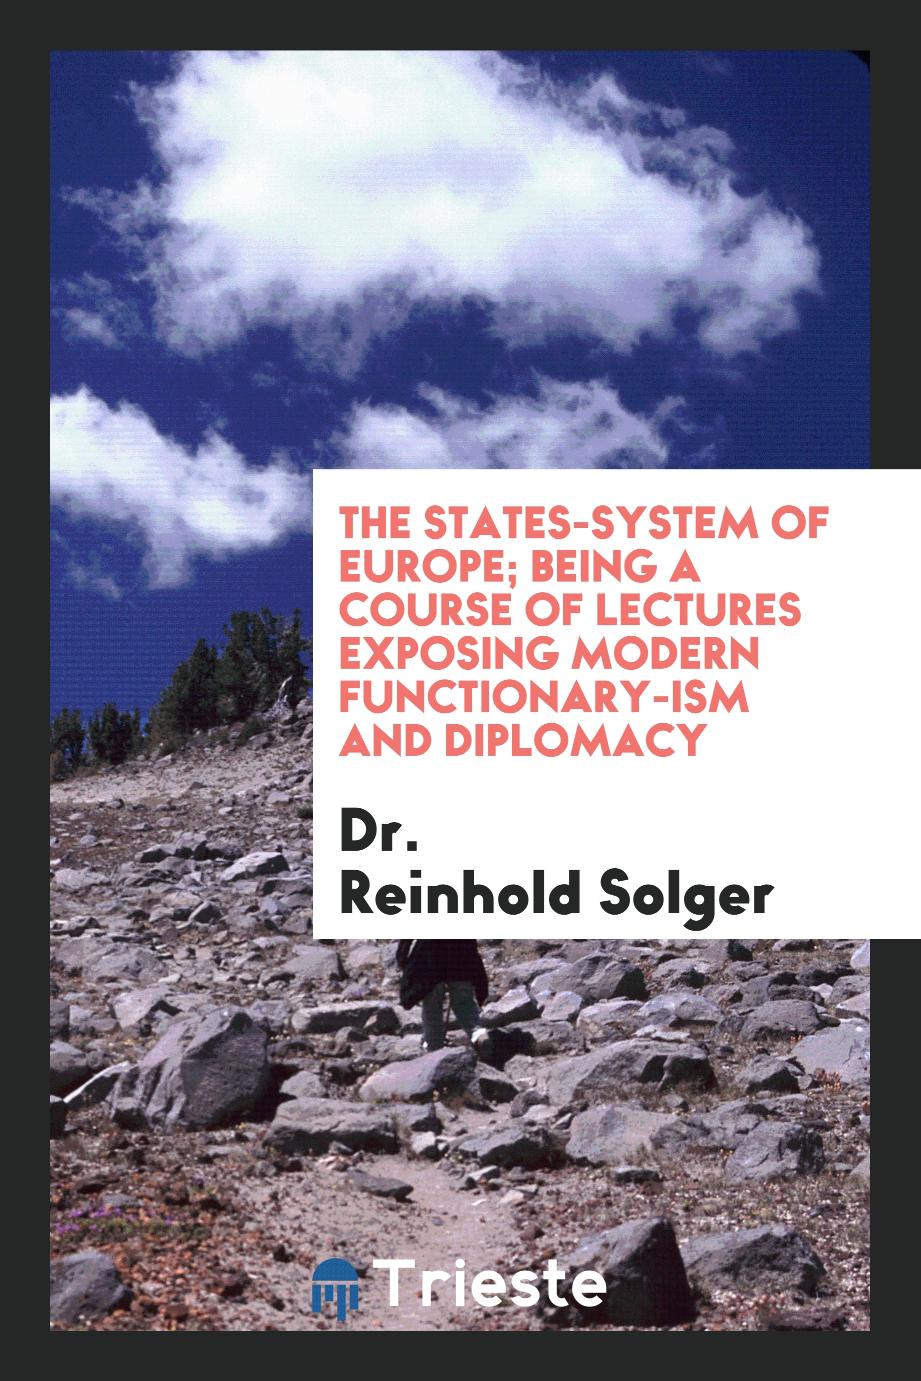 The States-System of Europe; Being a Course of Lectures Exposing Modern Functionary-ism and Diplomacy